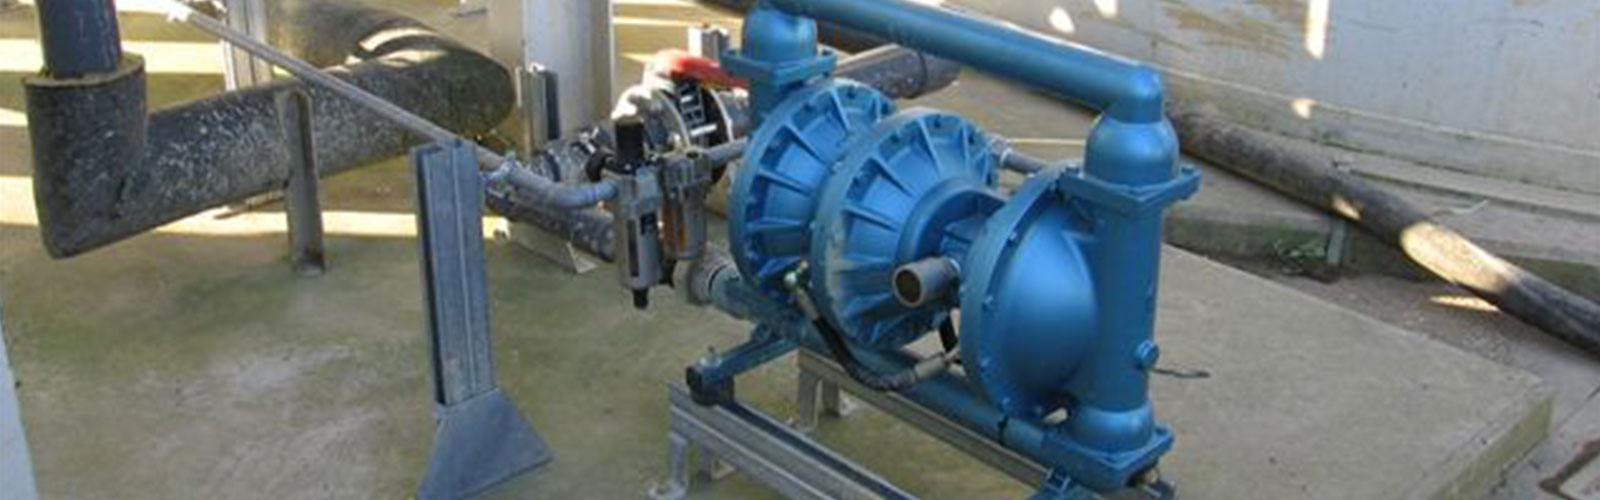 Suppliers of Allweiler Propeller Pumps for Chemical Industry